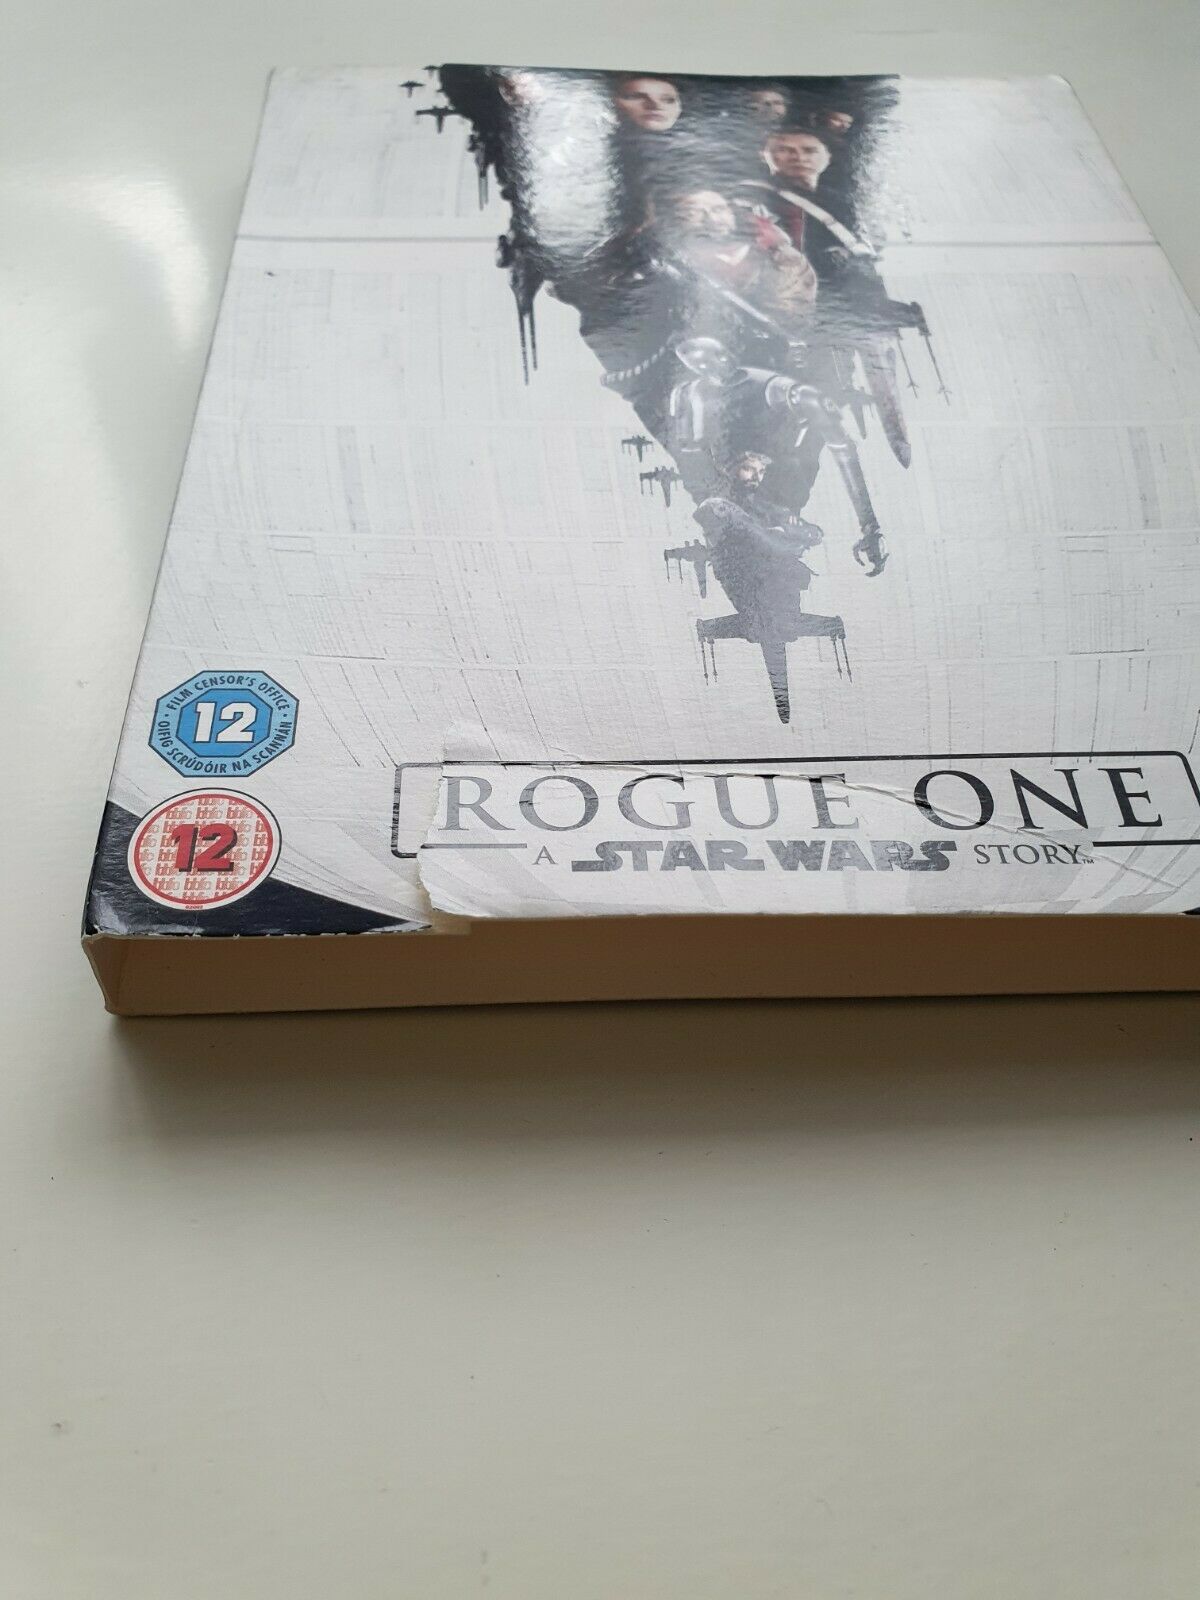 8717418500771 Rogue One: A Star Wars Story Blu-ray 2017